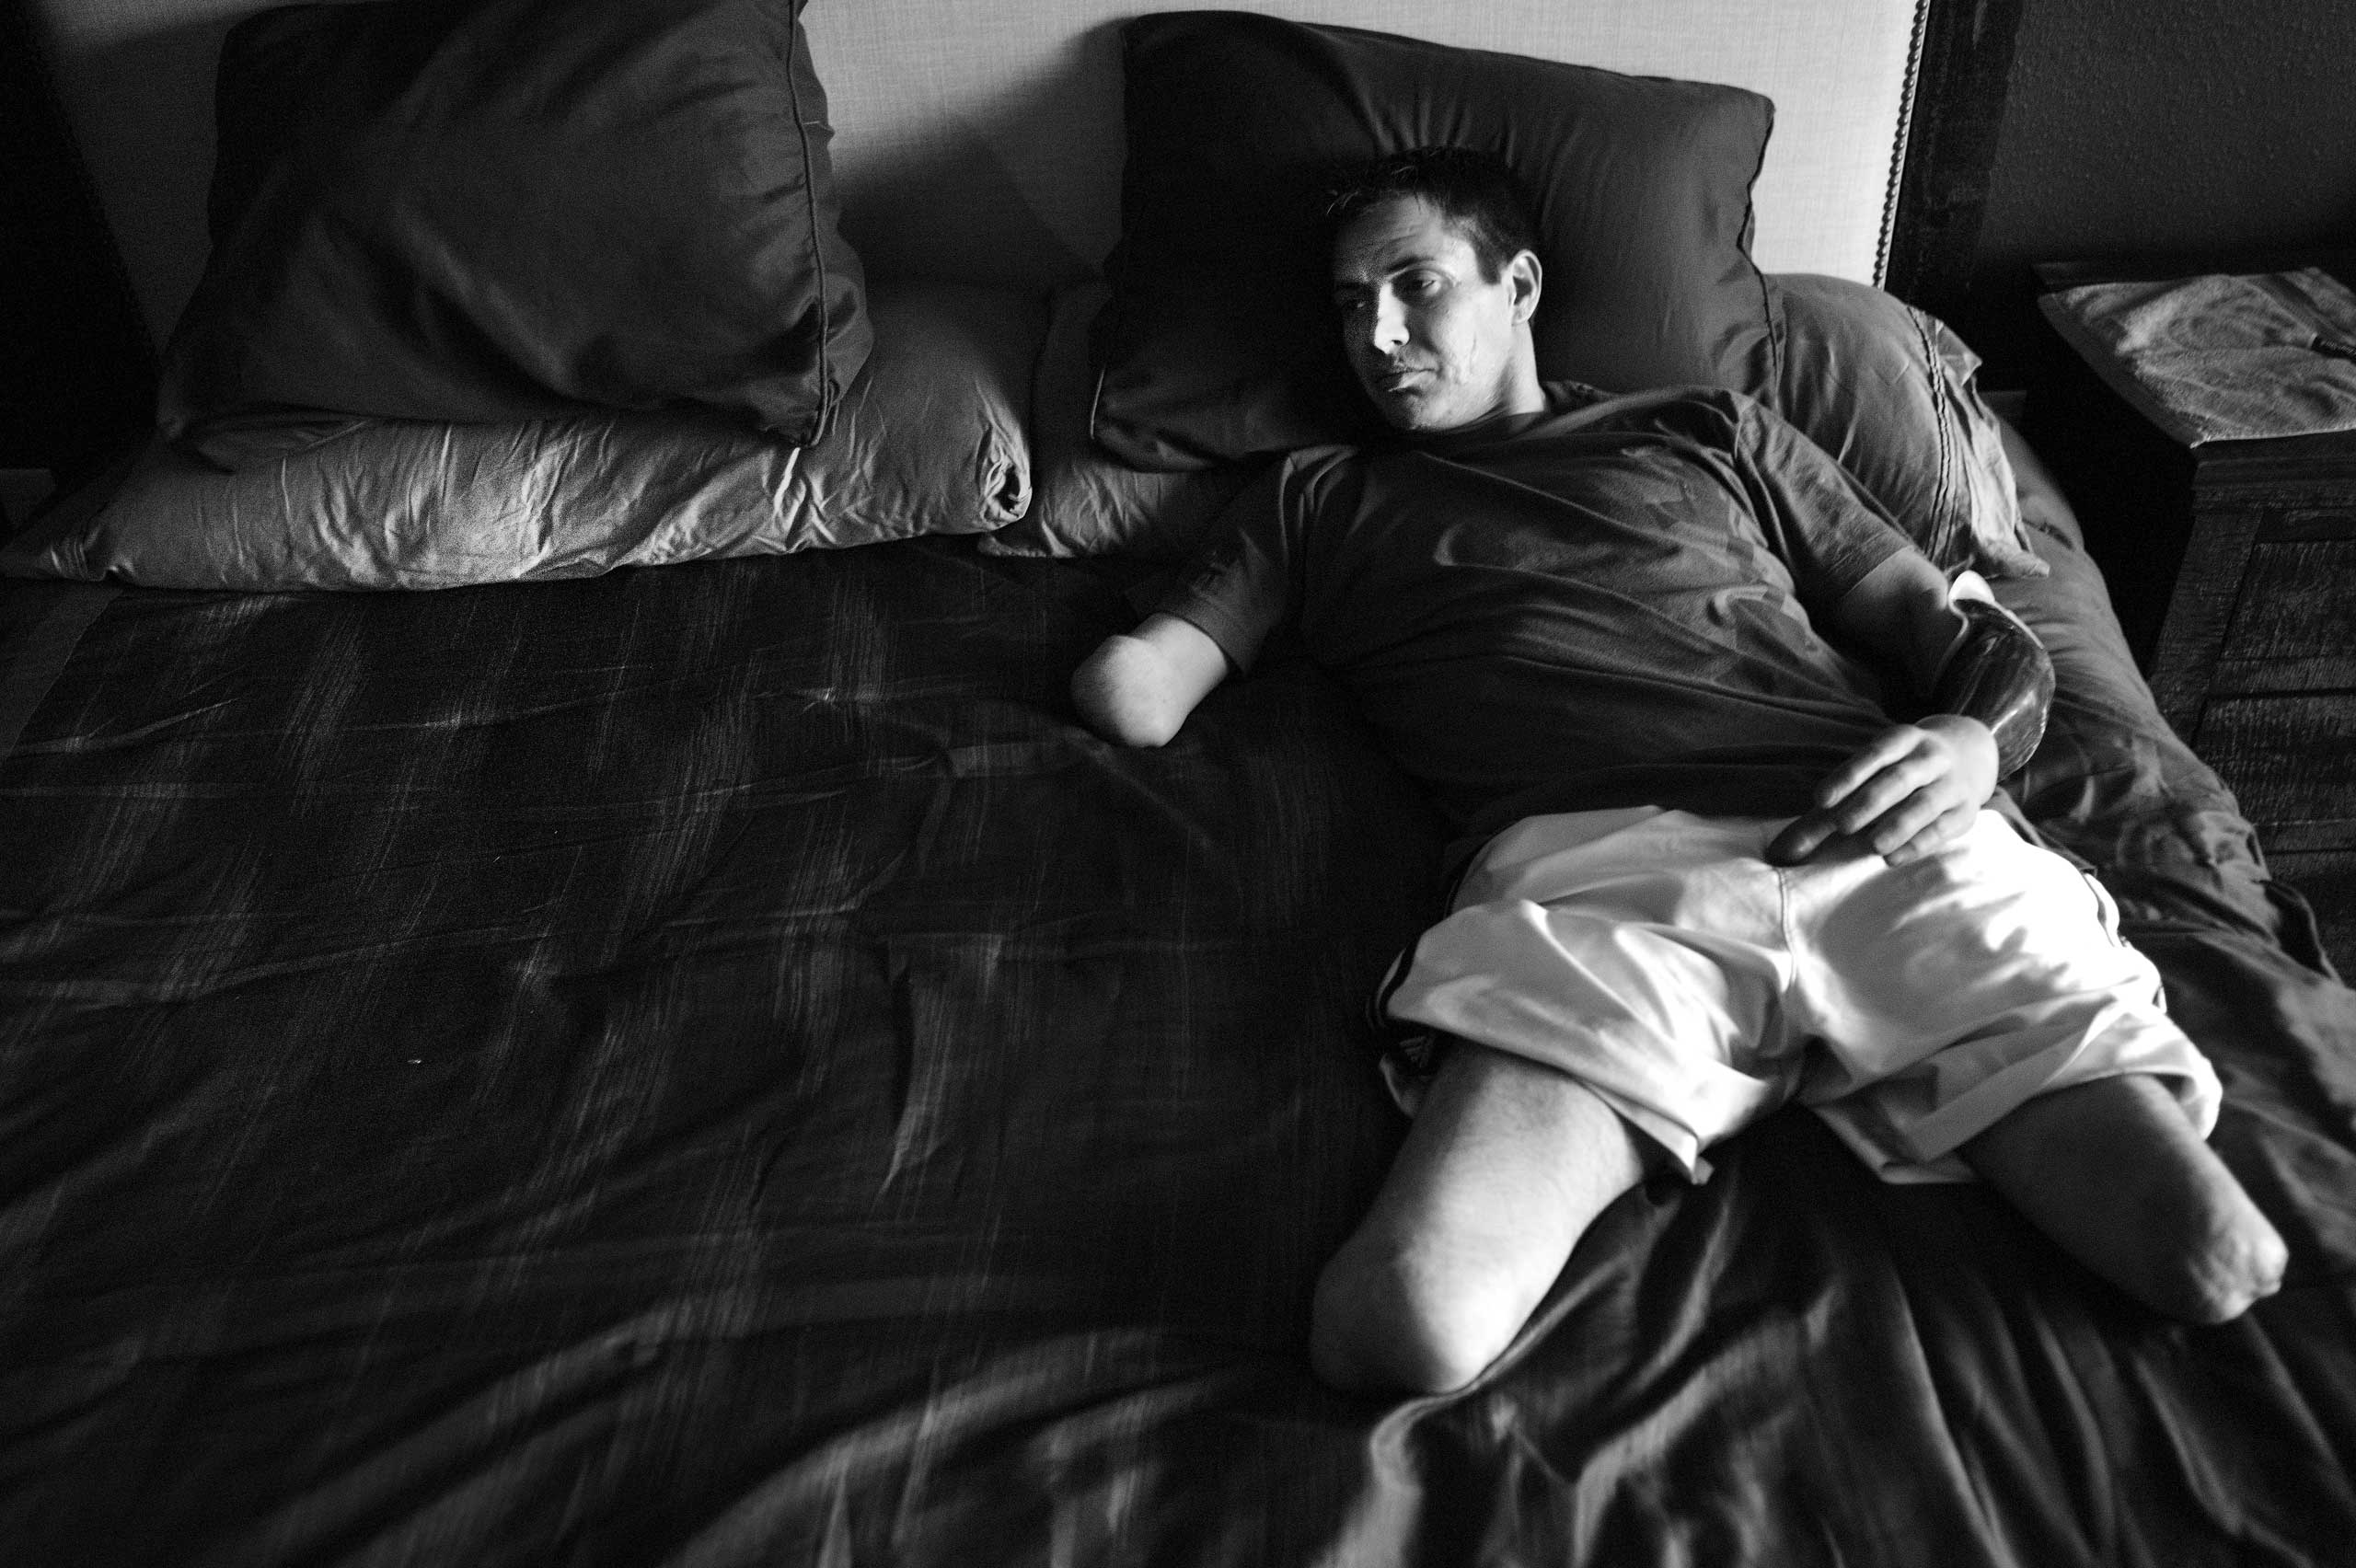 Corporal Todd Nicely, a quadruple amputee Marine who lost his limbs after he stepped on an improvised explosive device in Afghanistan, resting in his bedroom, at home, in Lake Ozark, Miss, 2014.